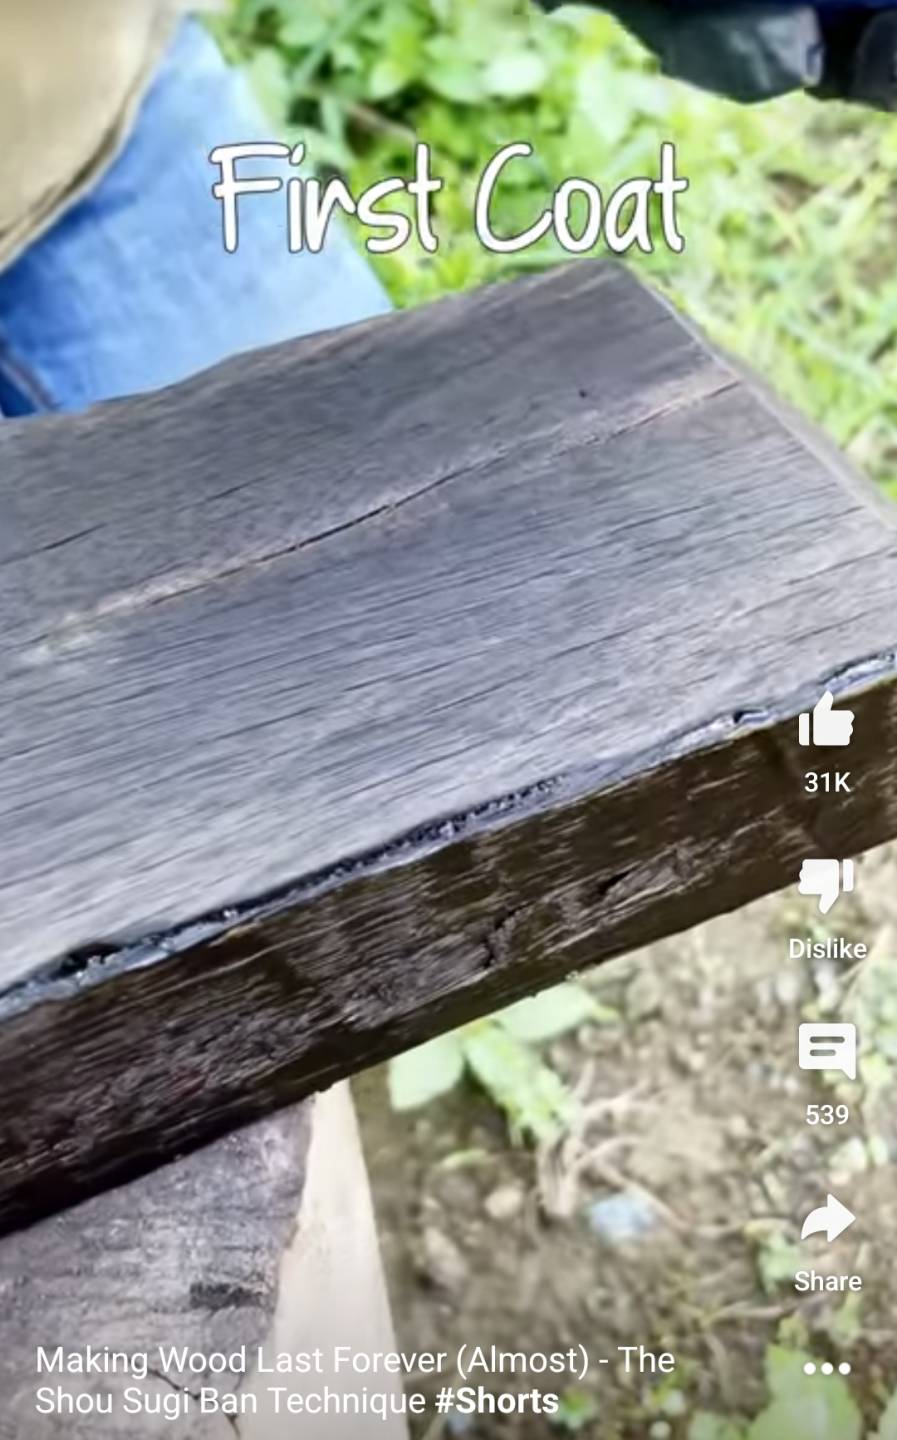 Shou Sugi Ban wood preservation how-to video